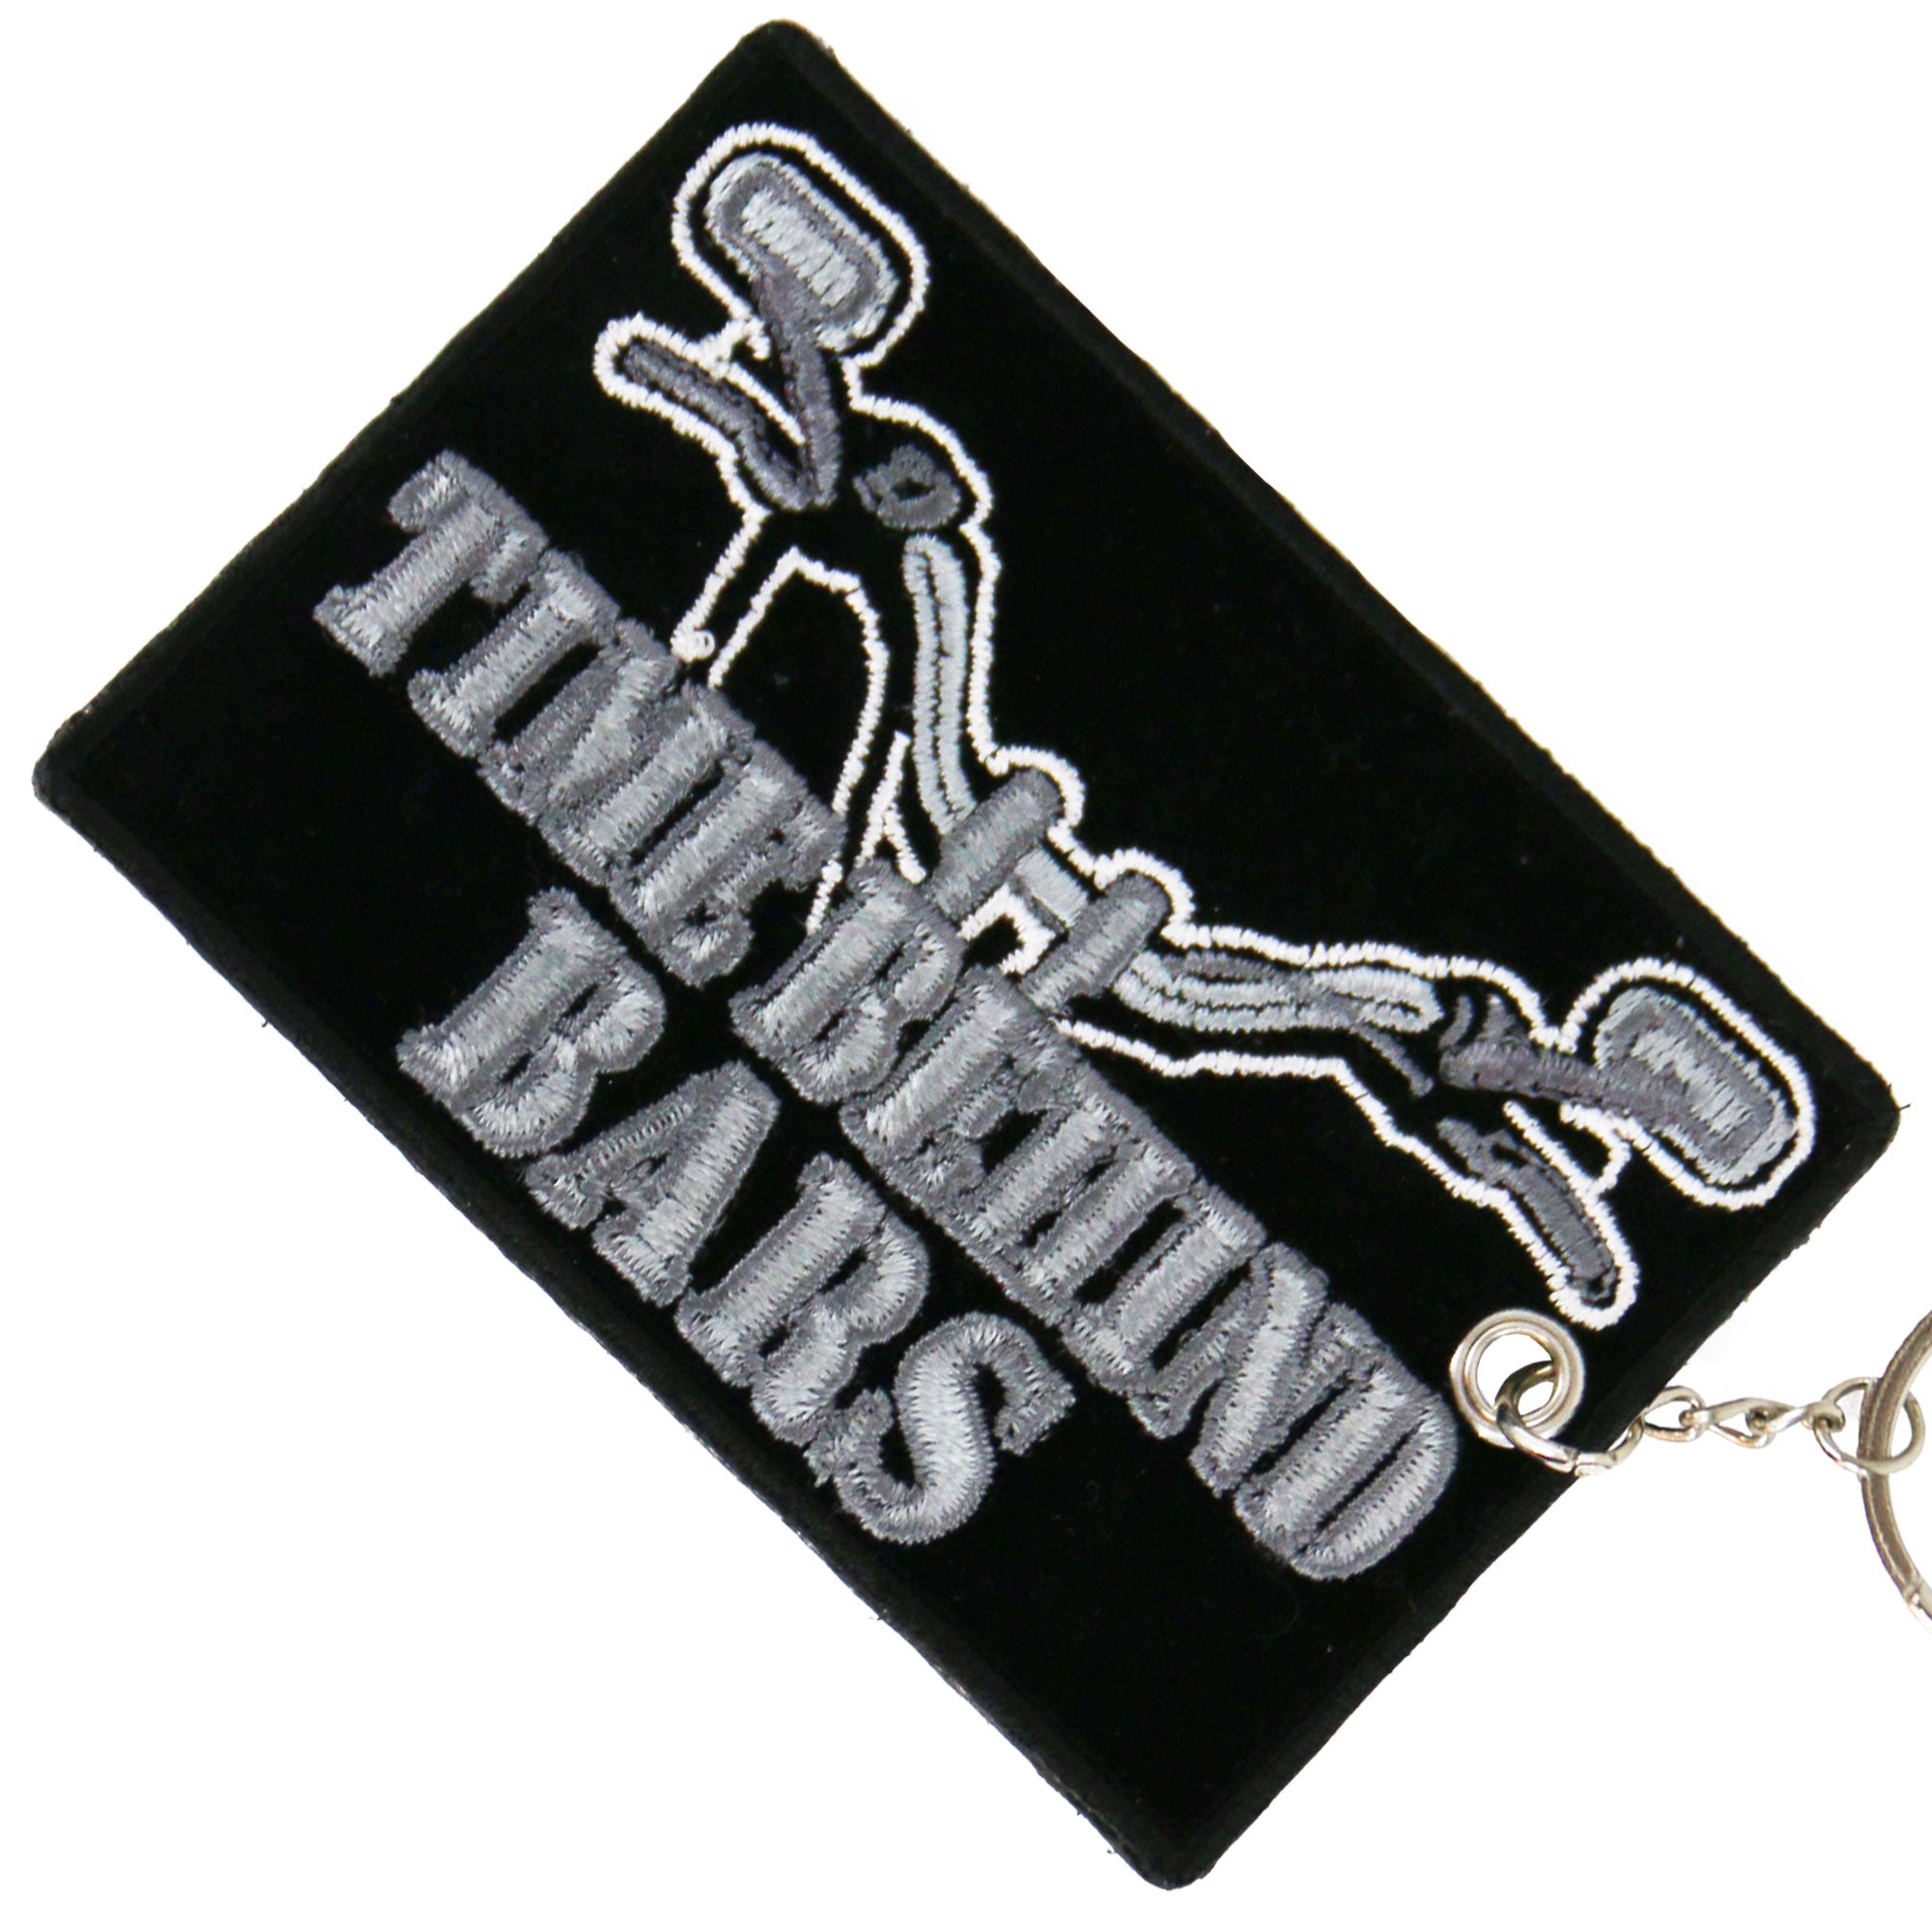 Hot Leathers Time Behind Bars Embroidered Key Chain